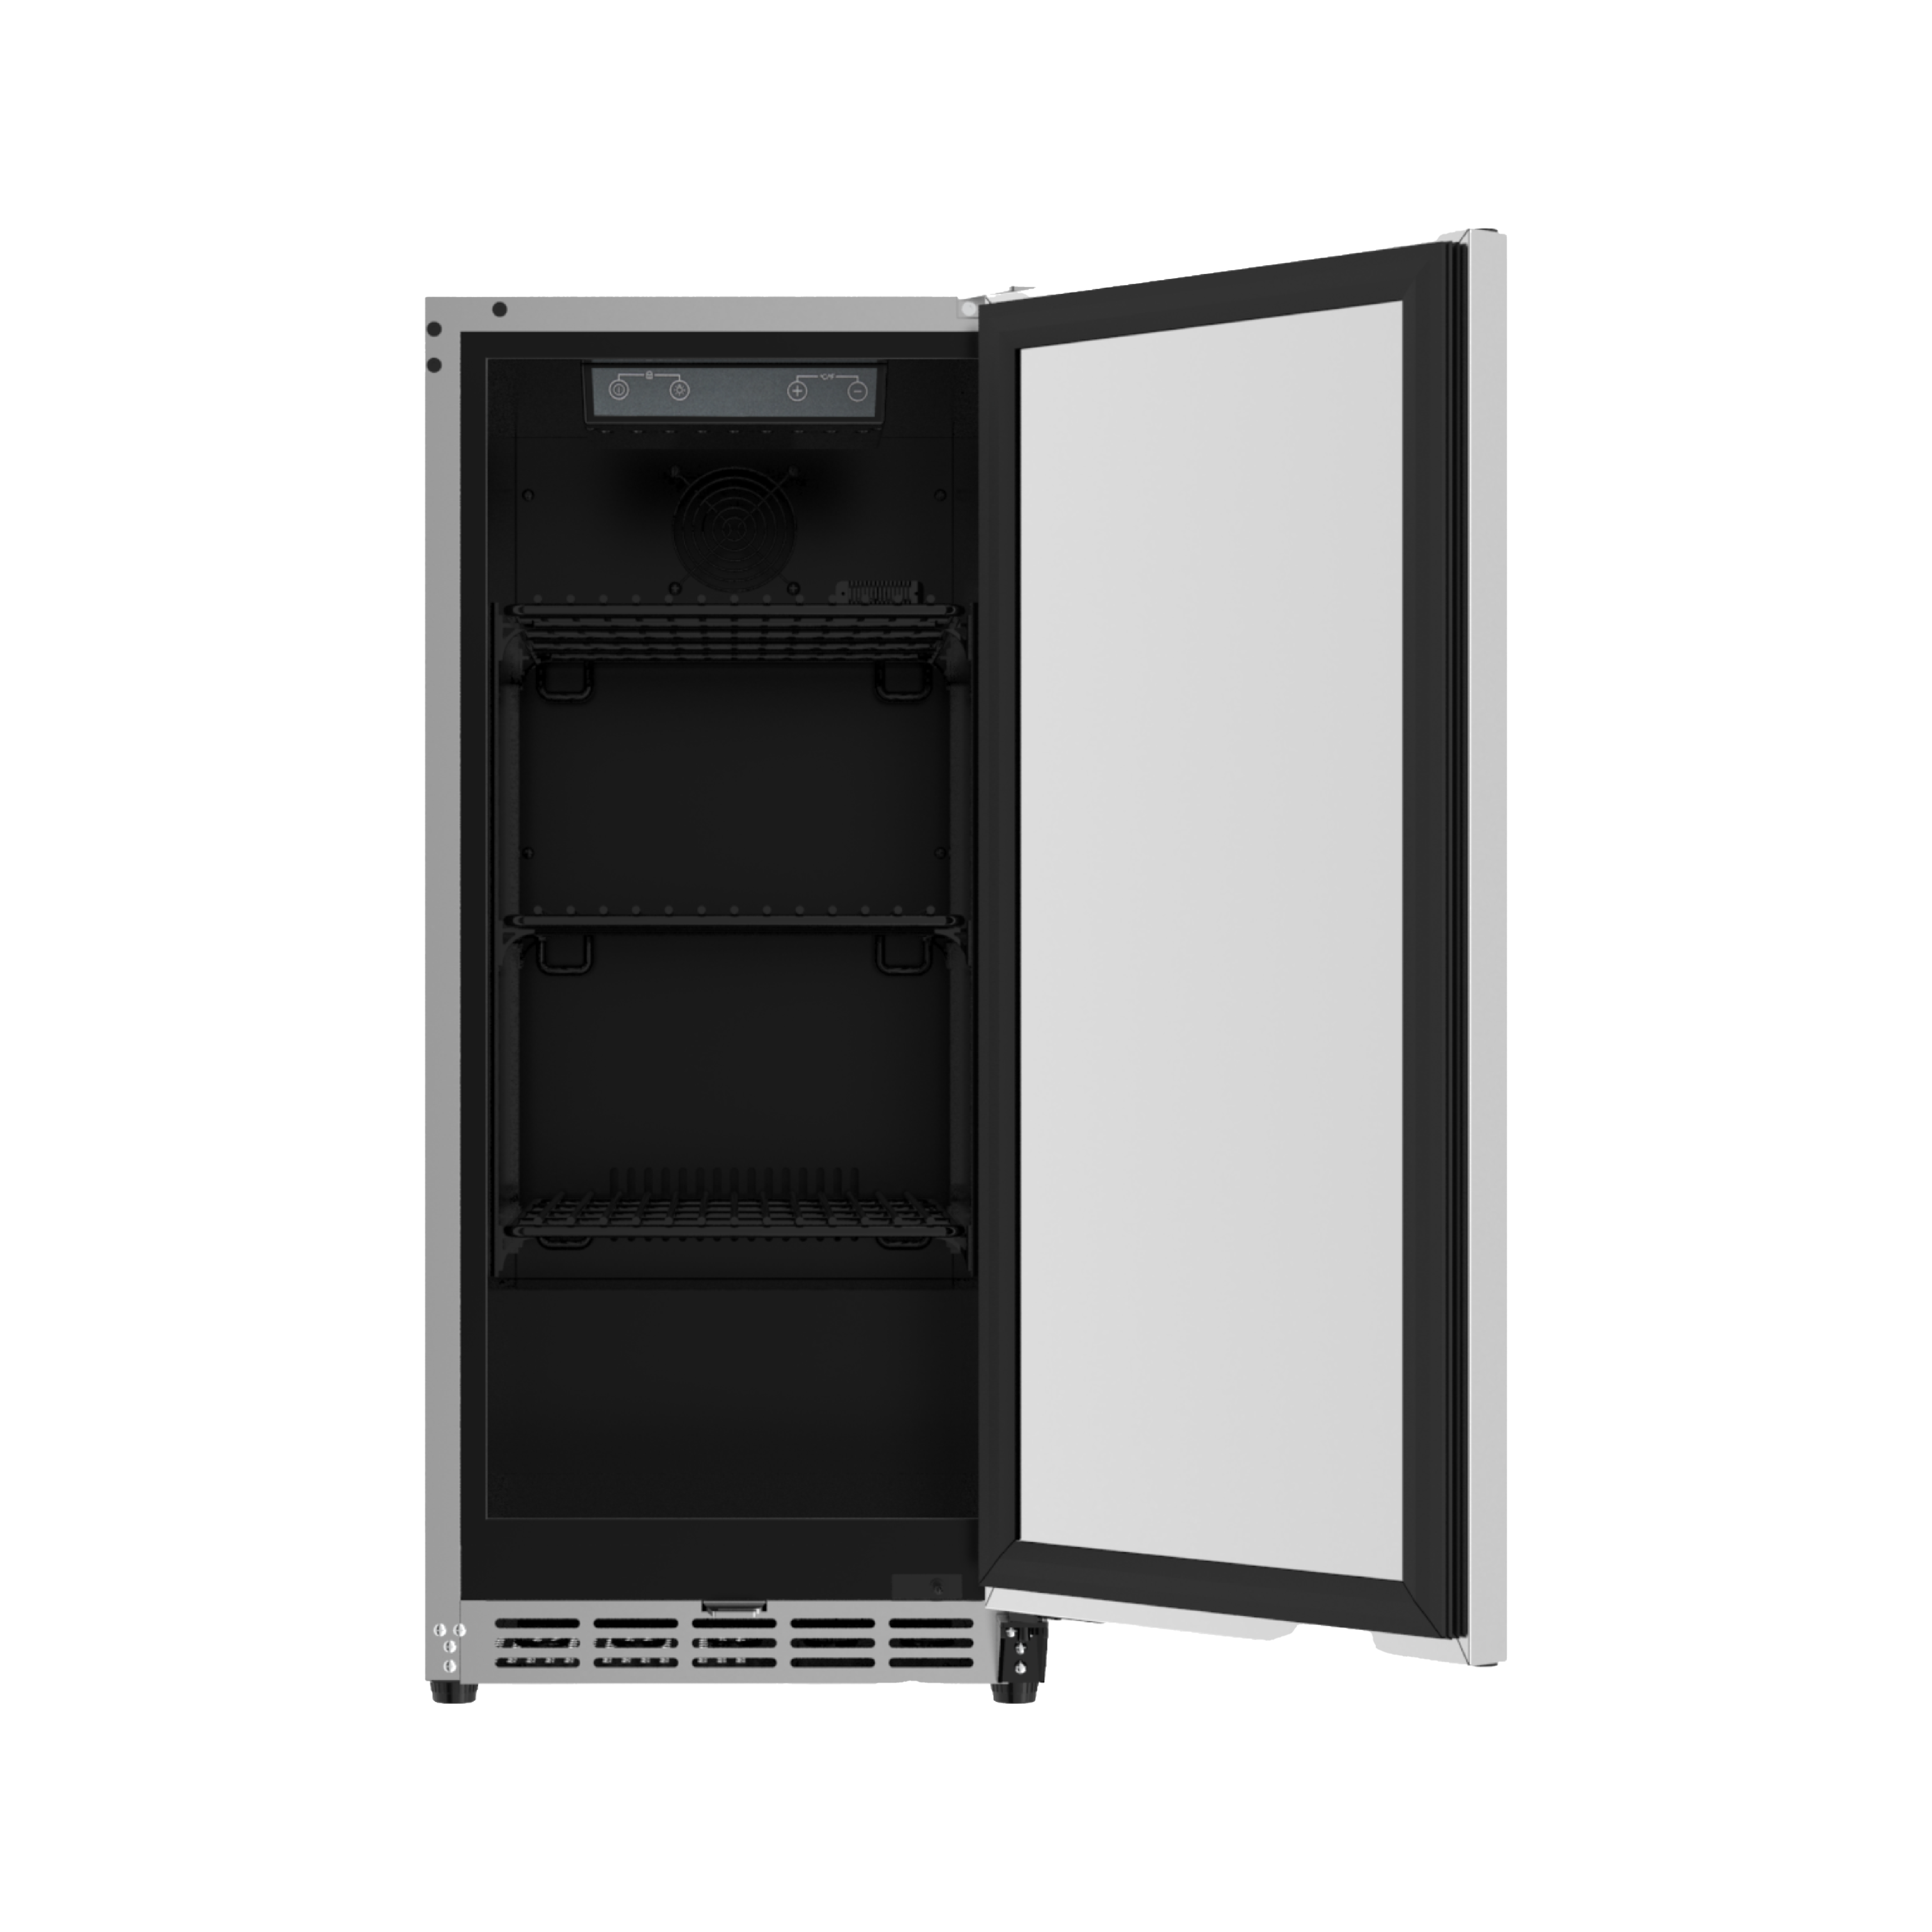 Front side of a 3.18 Cu Ft Undercounter Beverage Outdoor Refrigerator 96 cans with the door open, showcasing interior space with 3 shelves and a digital temperature control panel